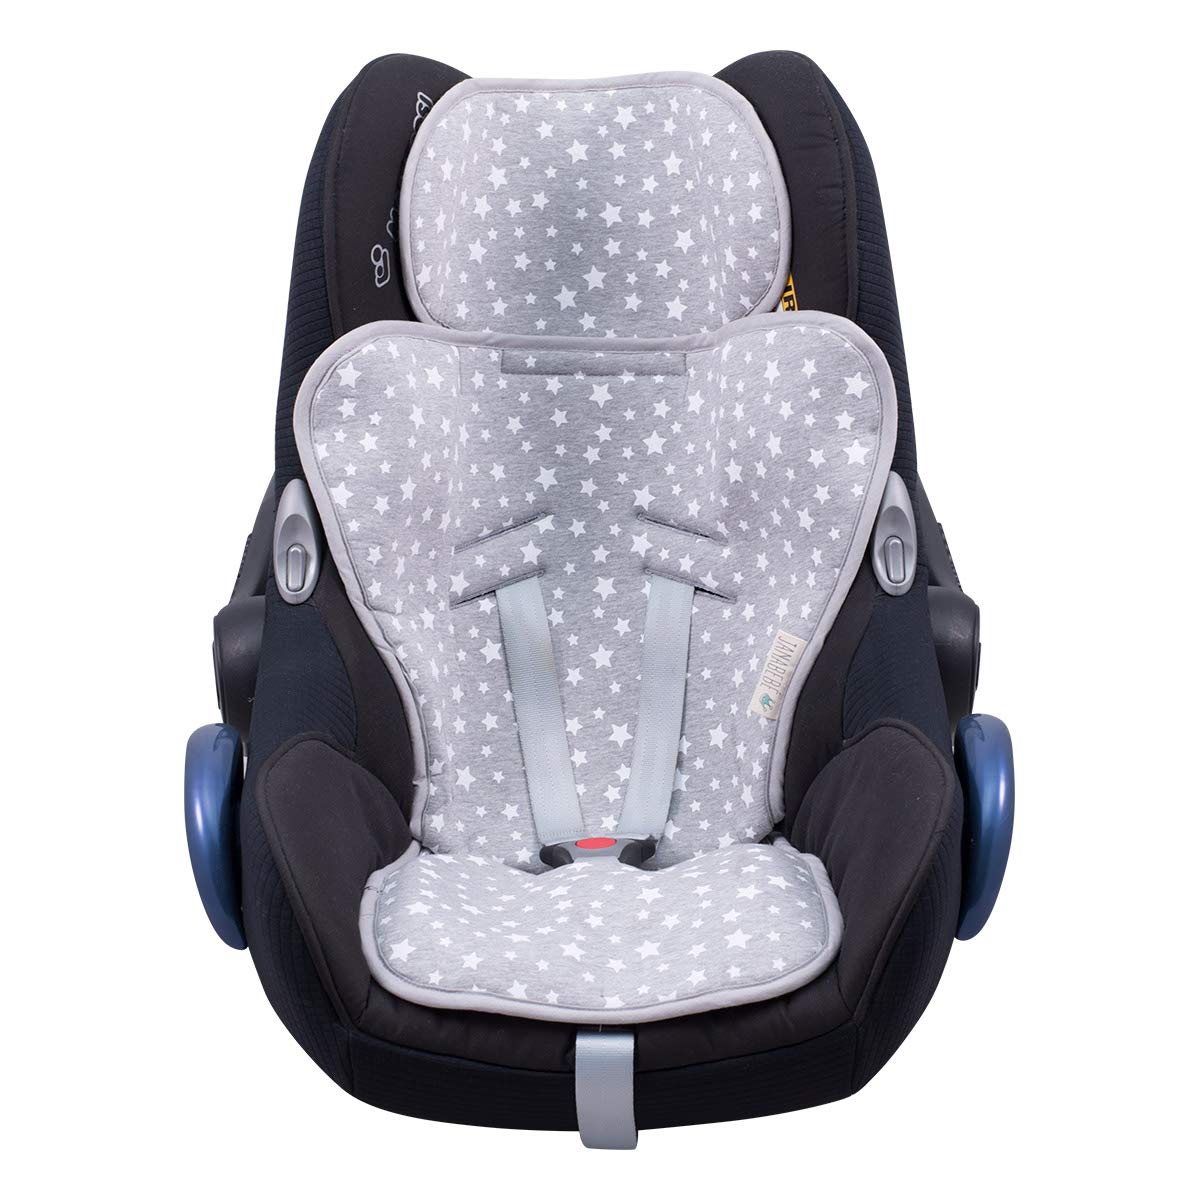 JANABEBE Seat Cover for Child Car Seat Size 1 2 3 (Winter Star)